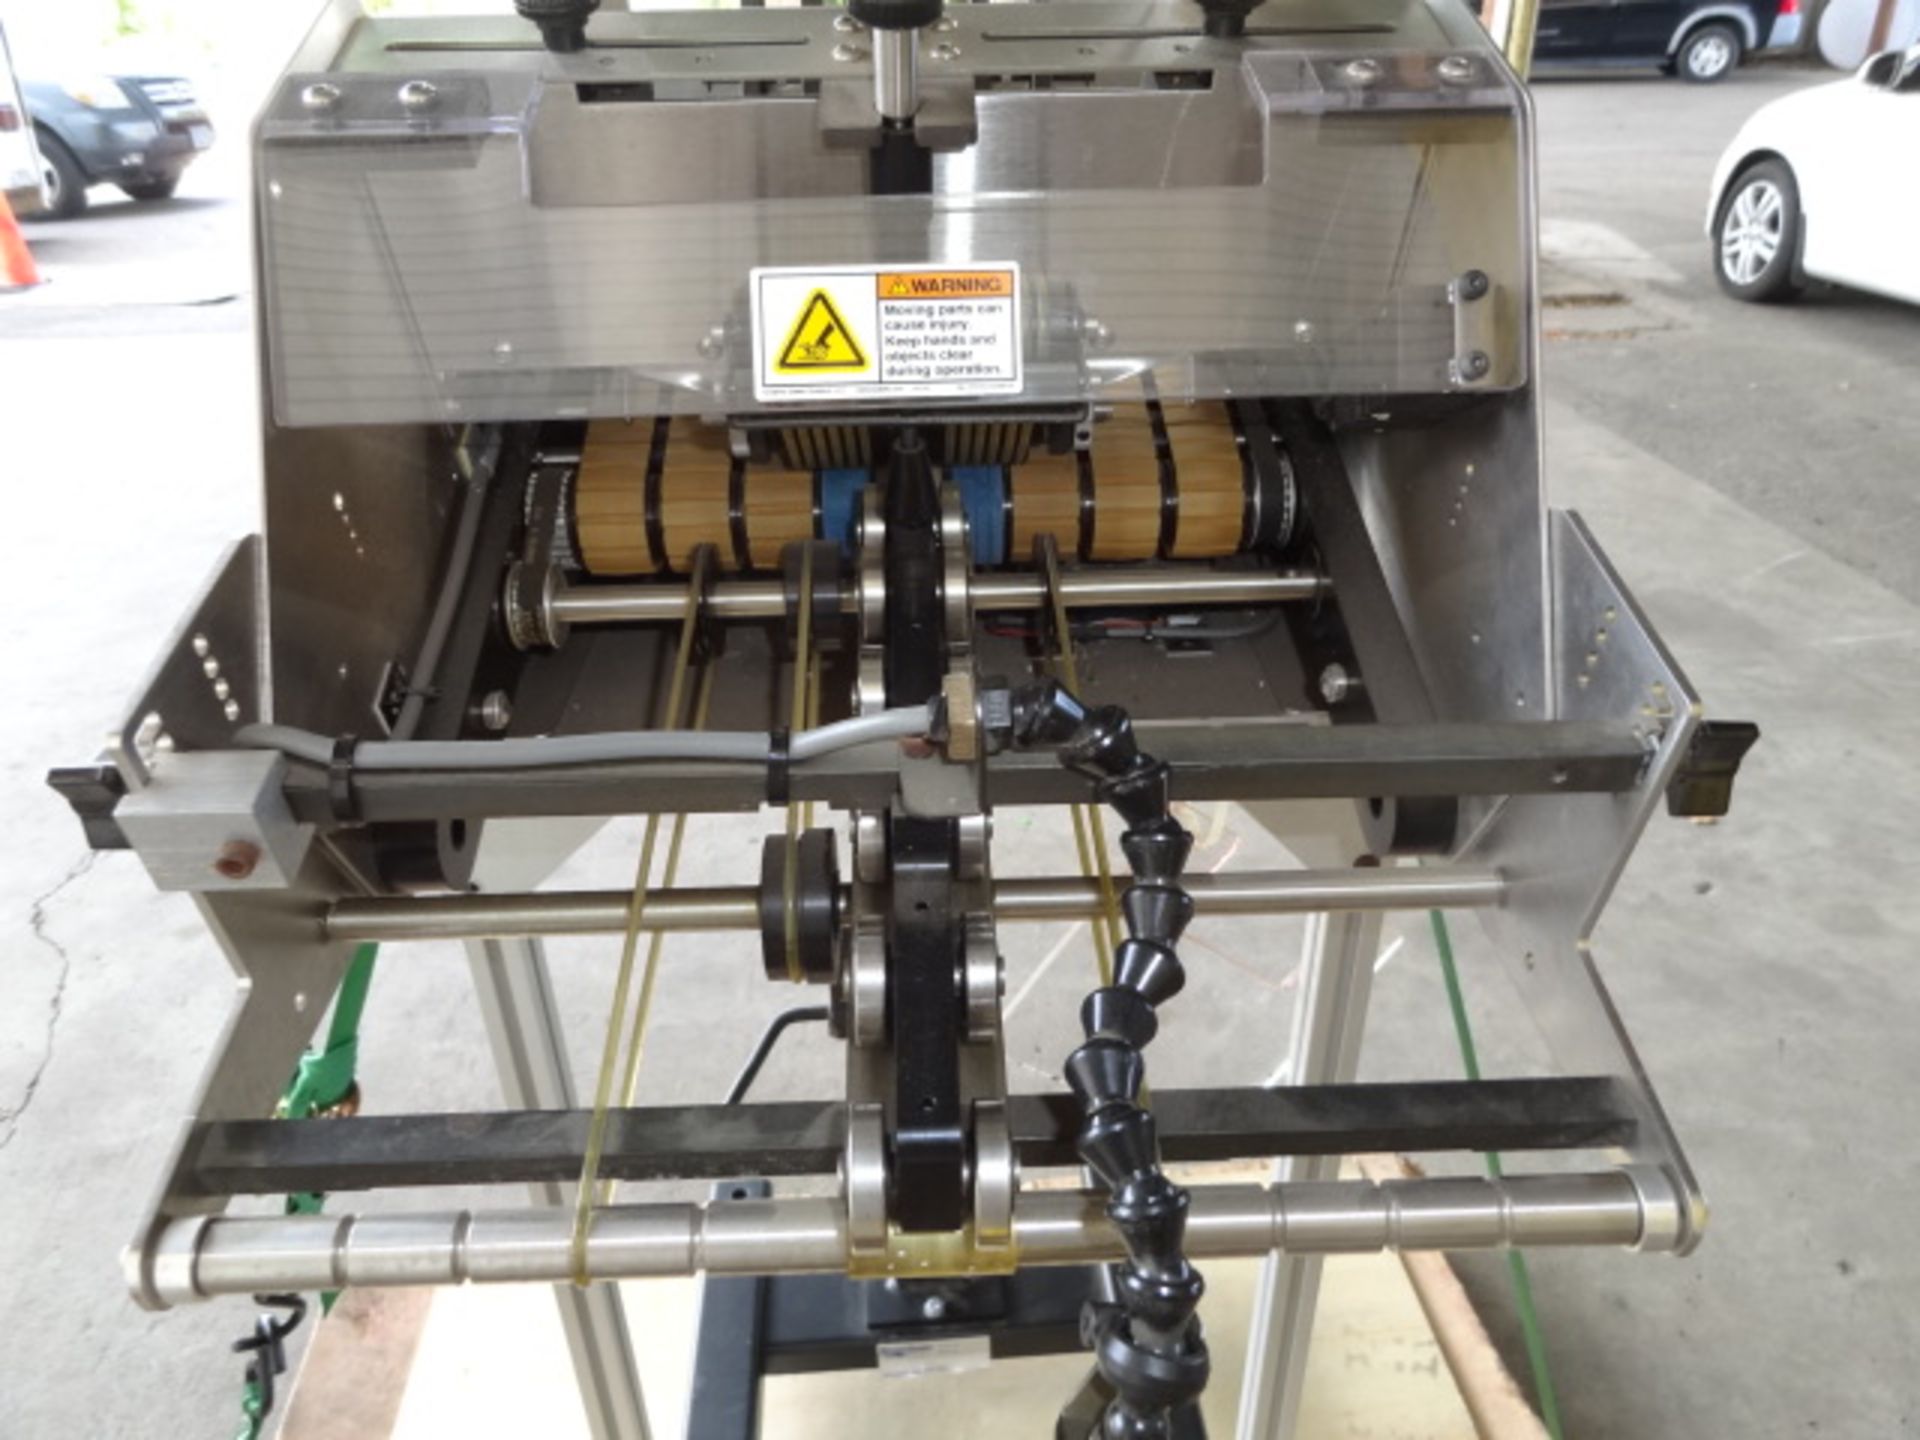 Streamfeeder Friction Feeder, Model # ST-1250 PRO, S/N 1250EXA442, for placing pamphlet , borchure - Image 3 of 4